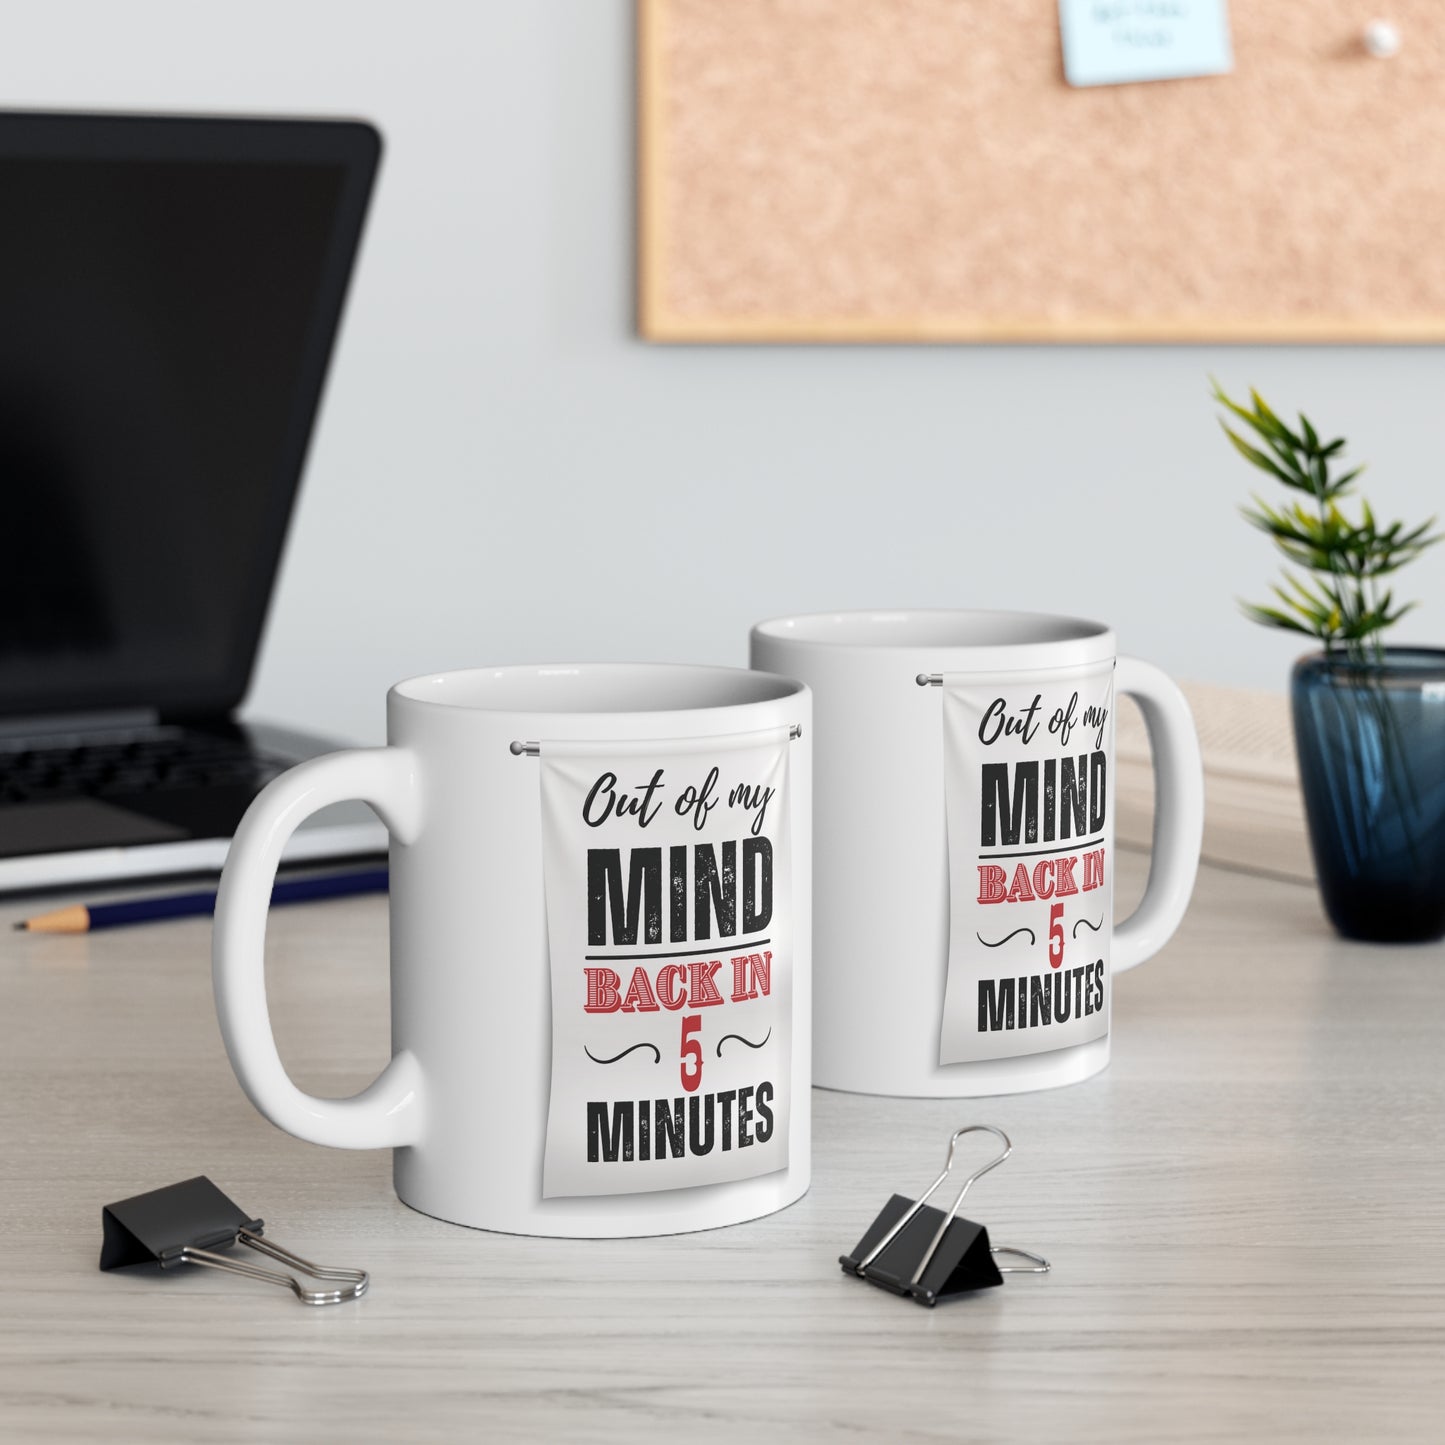 Out of My Mind, Back in 5 Minutes Mug - Embrace the Chaos